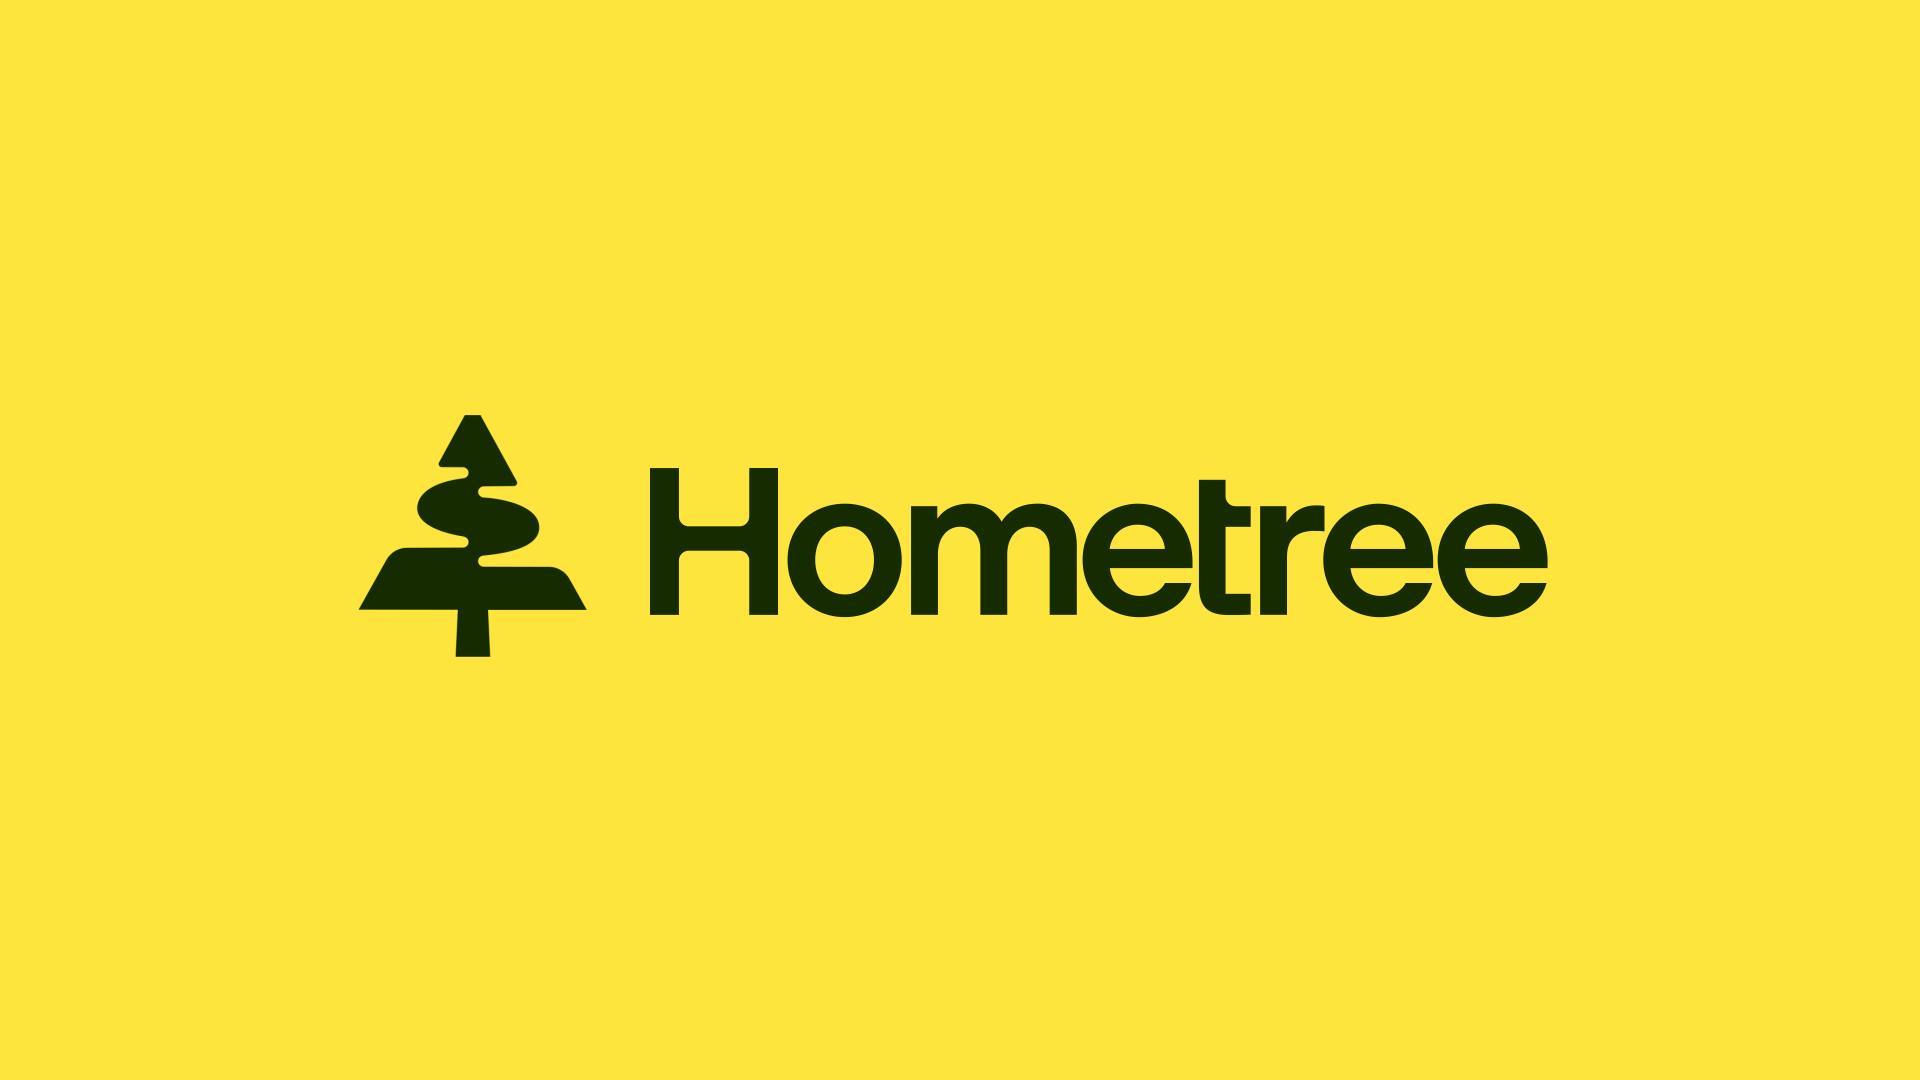 New spinning tree logo and sans-serif logotype for UK-based low-carbon home energy hardware company Hometree designed by How&How